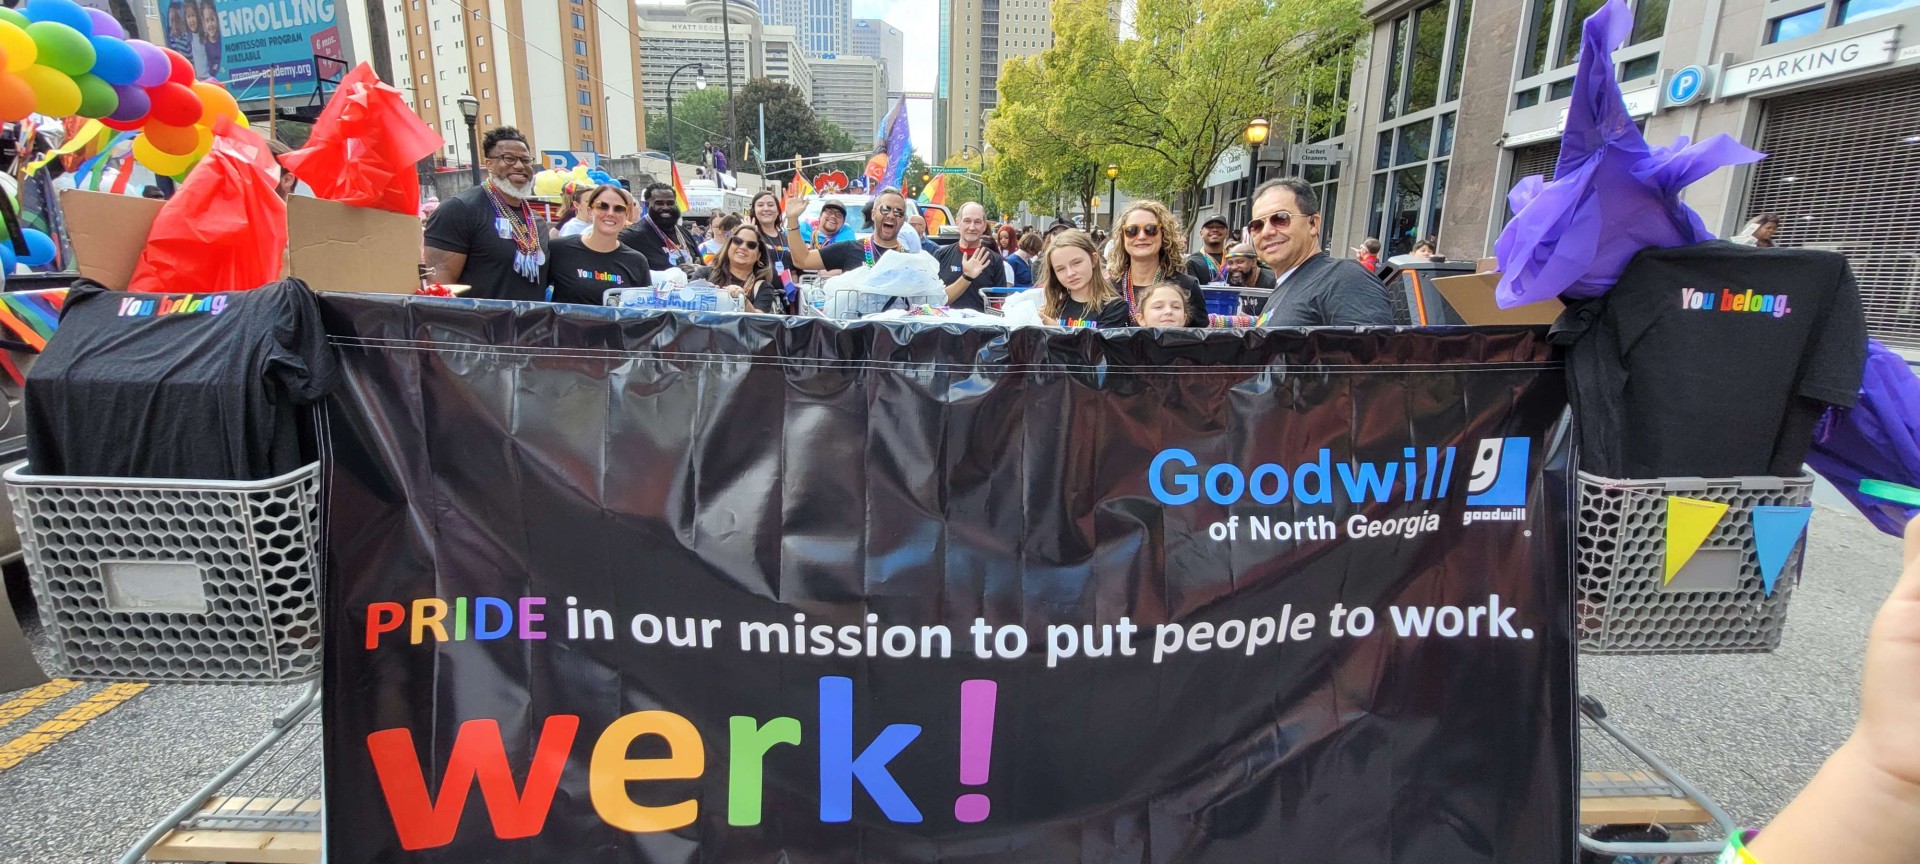 Goodwill of North Georgia: A Commitment to LGBTQ+ Inclusiveness and Support